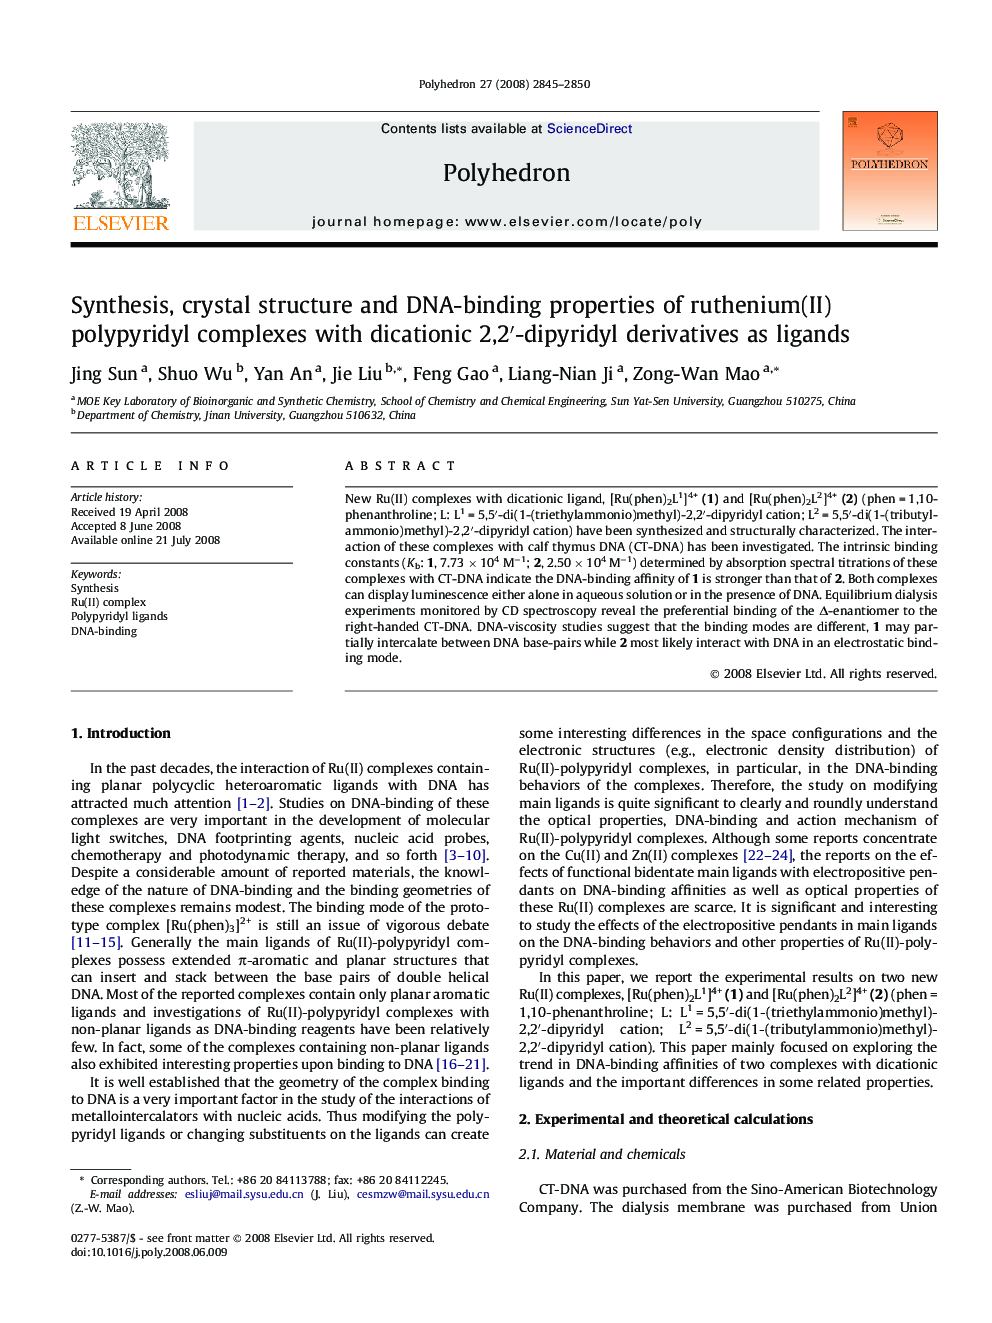 Synthesis, crystal structure and DNA-binding properties of ruthenium(II) polypyridyl complexes with dicationic 2,2′-dipyridyl derivatives as ligands